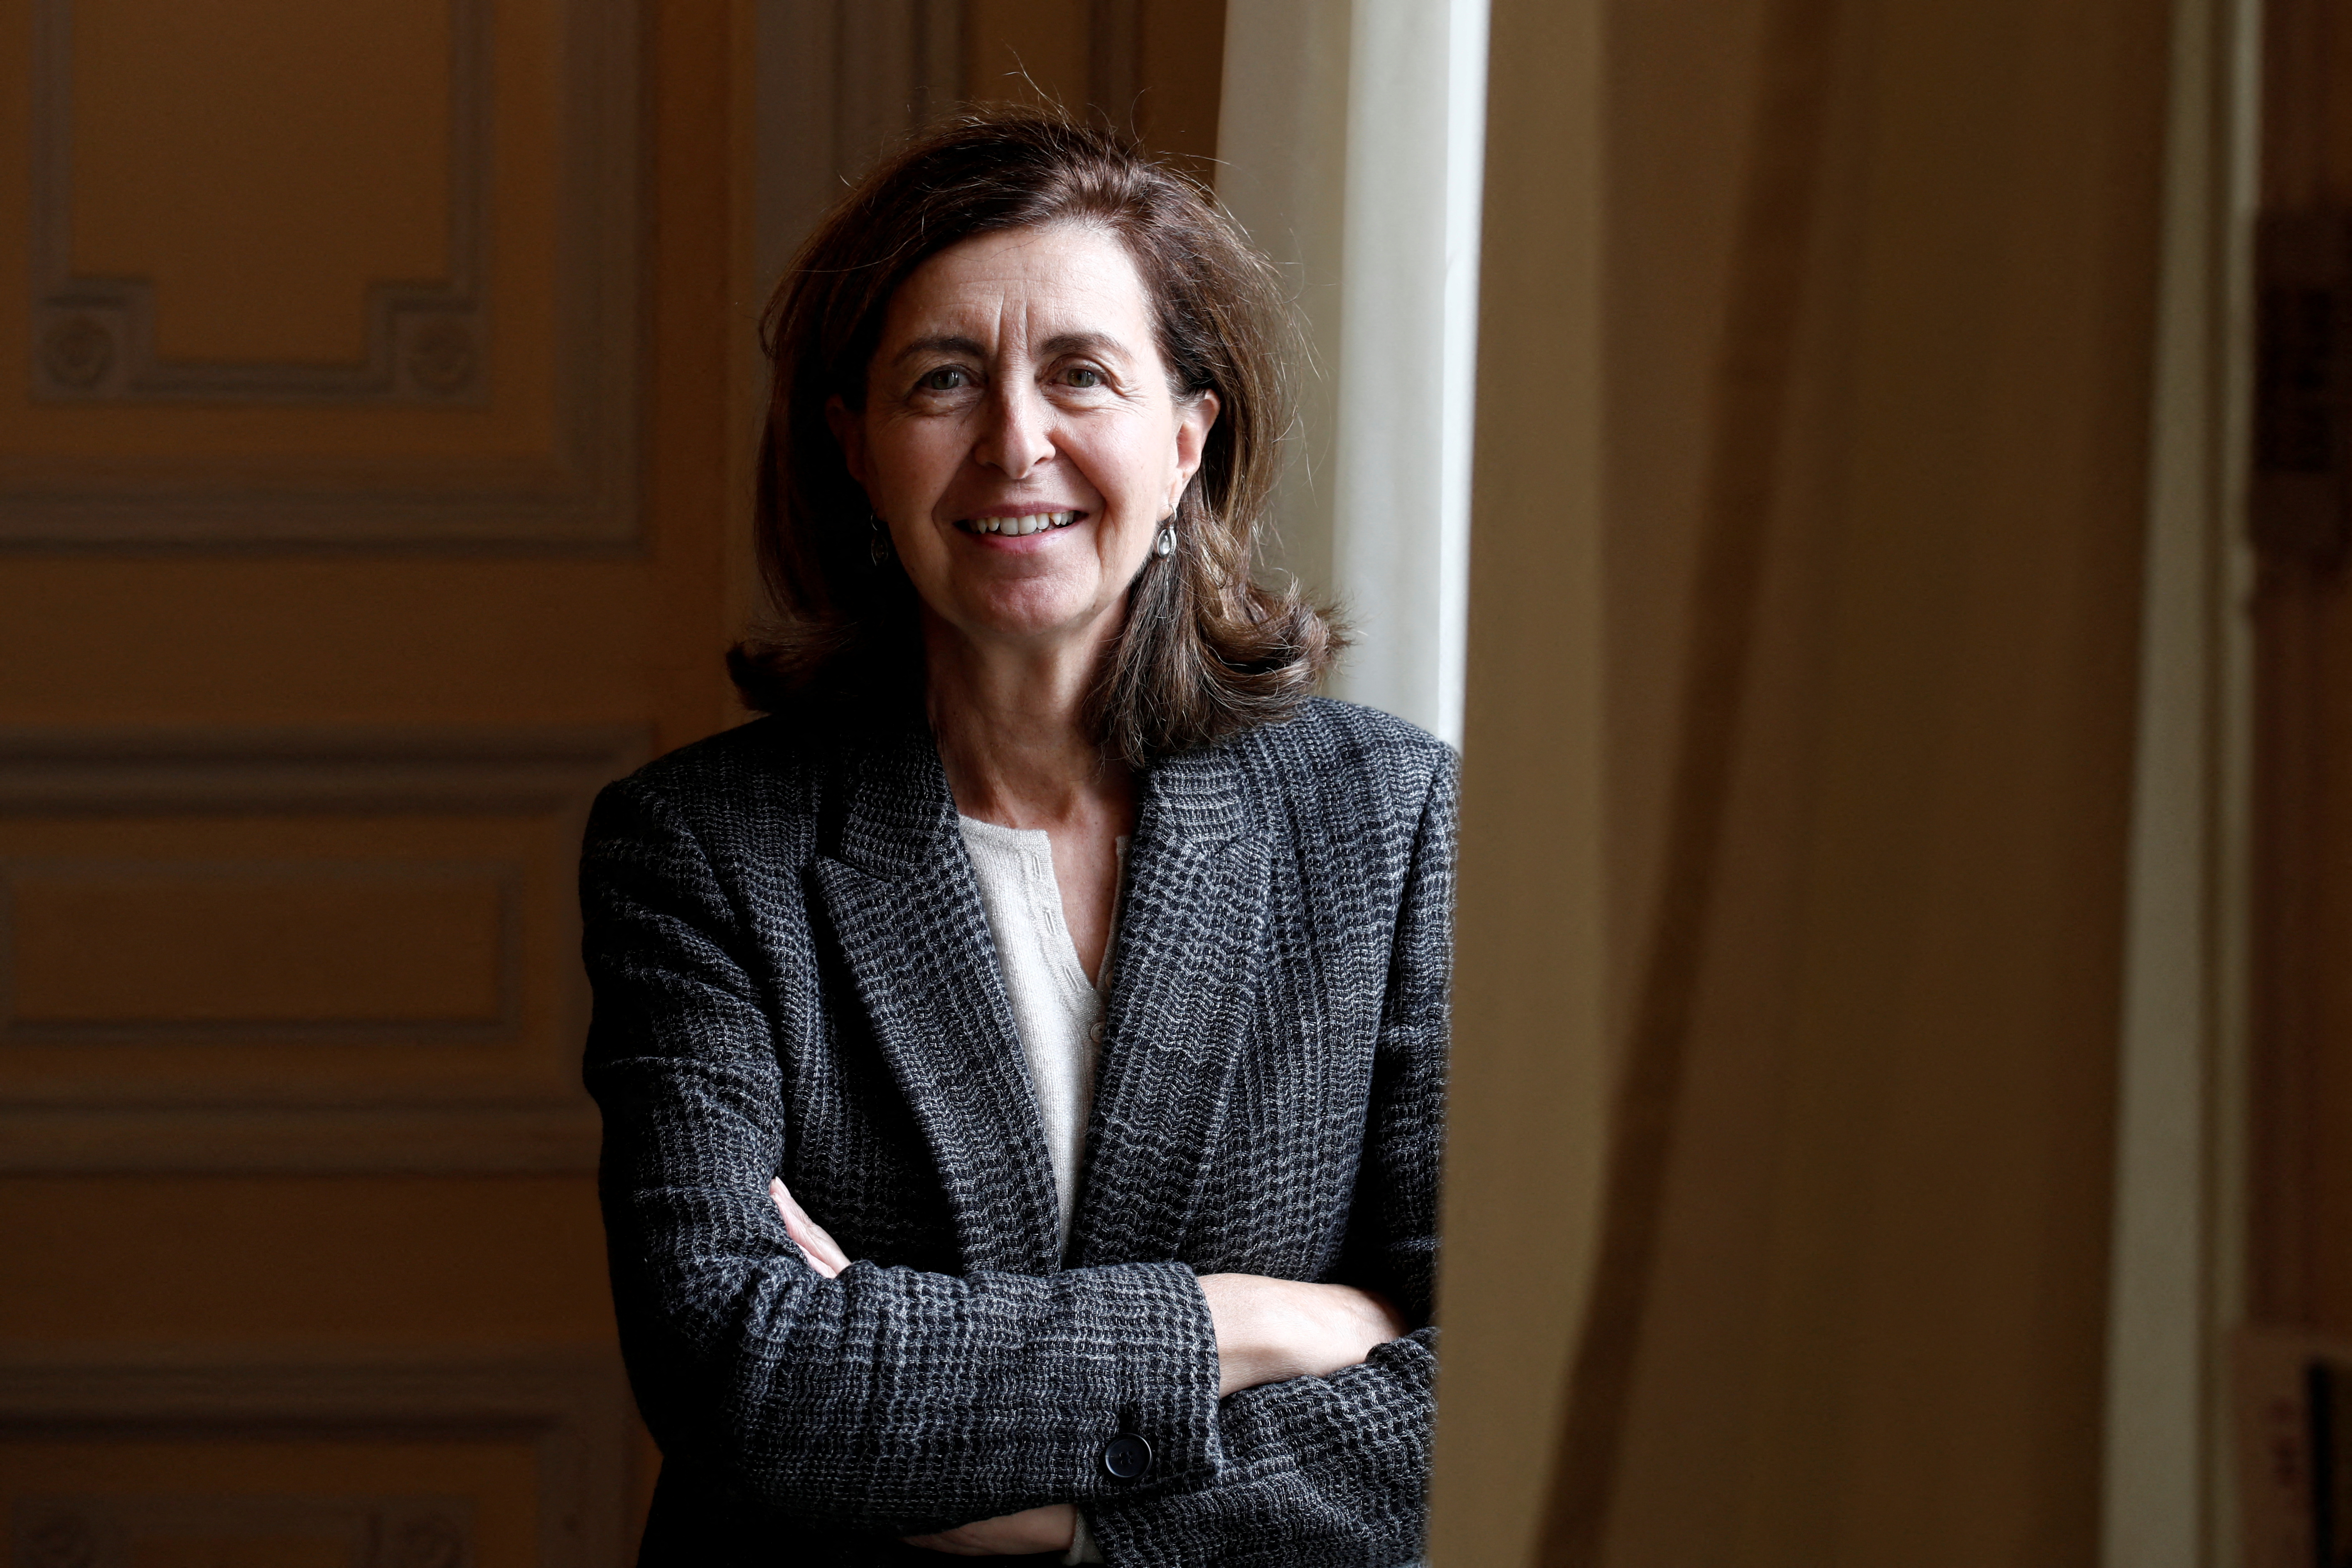 Dr Monique Eloit, Director General of the World Organisation for Animal Health (OIE), poses for a portrait at their headquarters in Paris, France, October 30, 2019. REUTERS/Benoit Tessier/File Photo